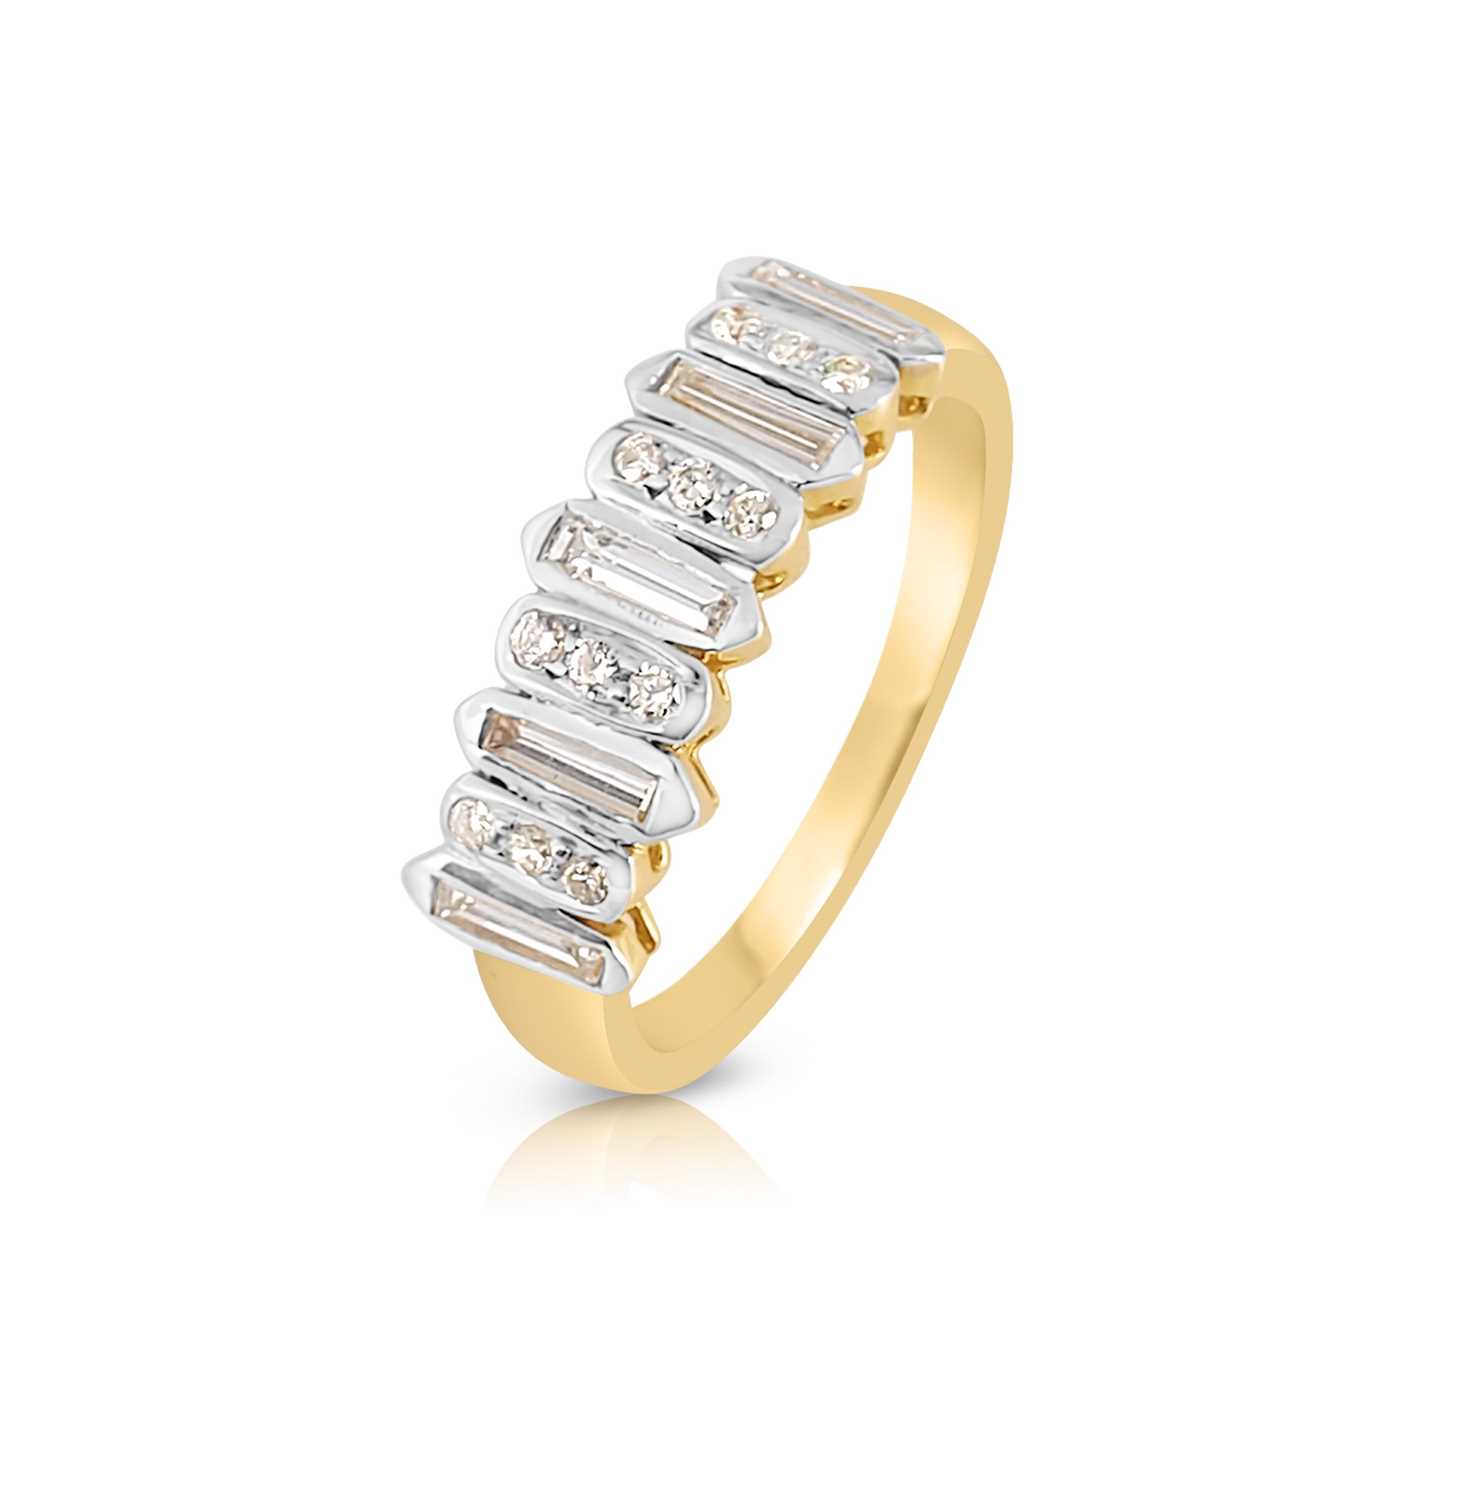 Lot 554 - Gold Ring with Diamonds